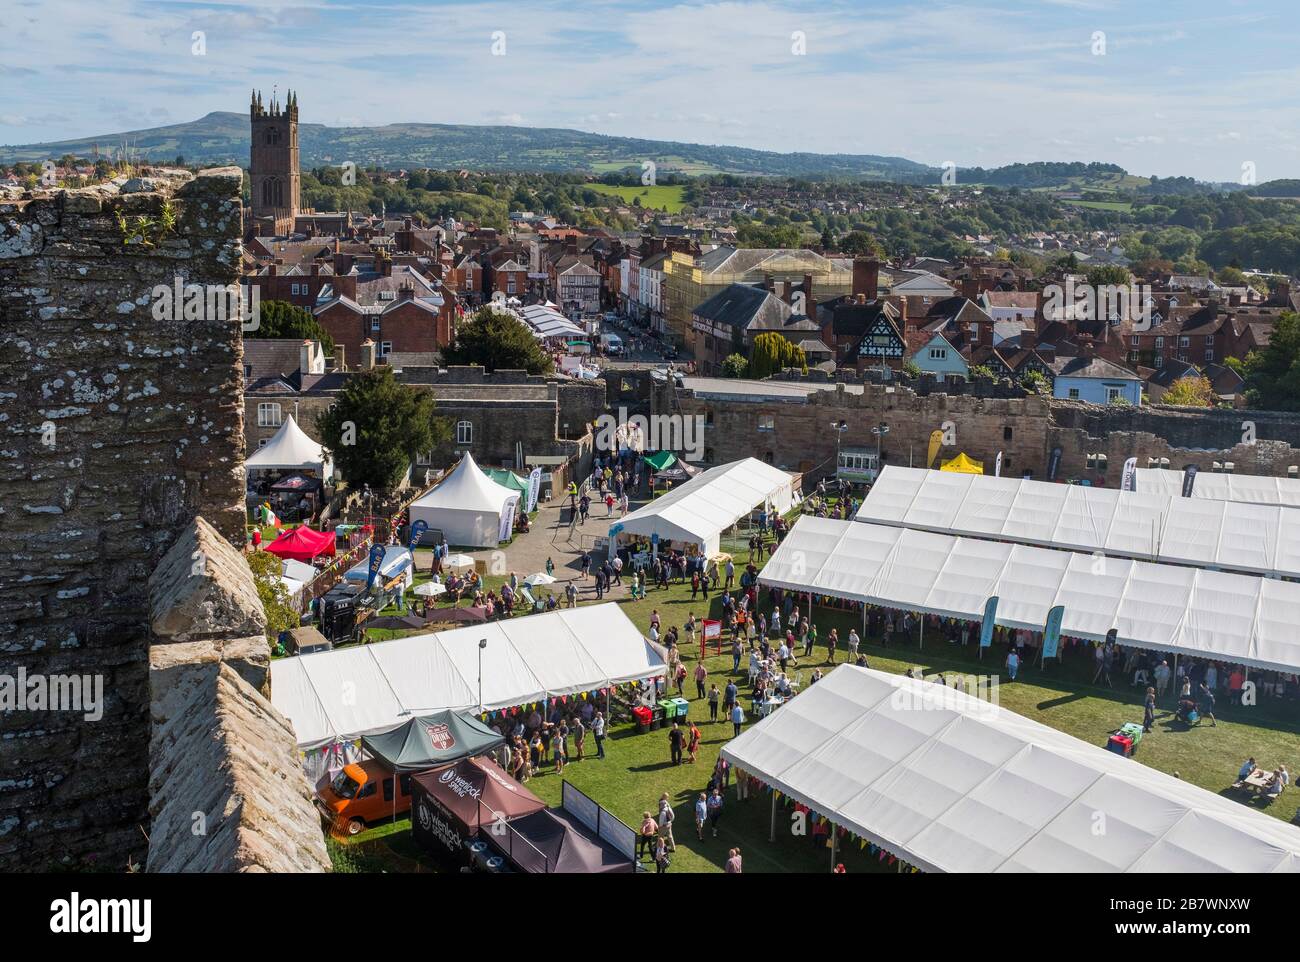 View of Ludlow Food Festival from the Great Tower of Ludlow Caste, Shropshire, England, UK. Stock Photo